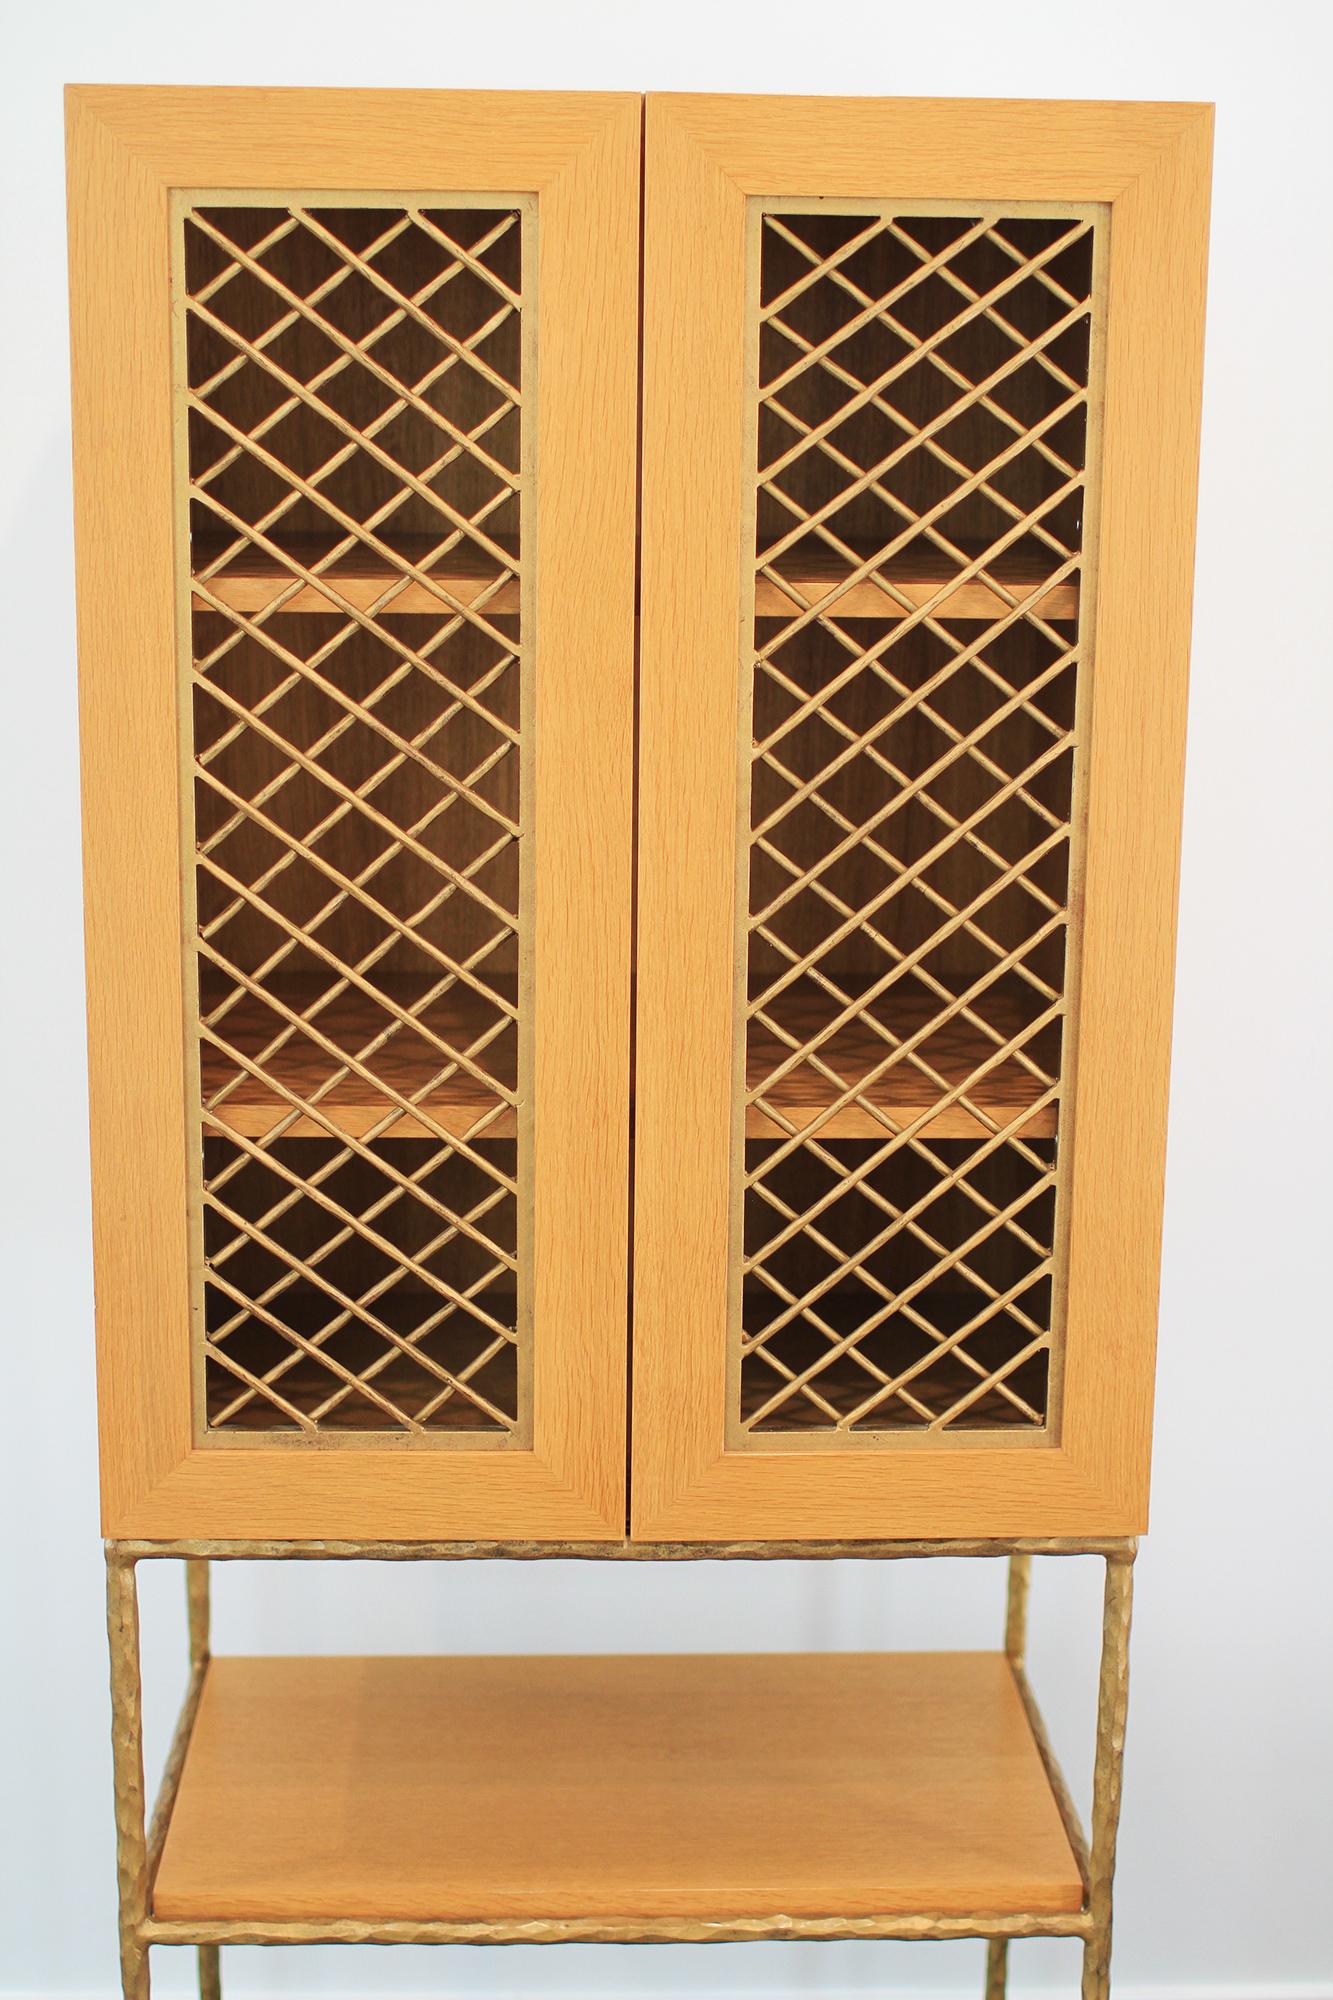 Garouste & Bonetti Cabinet, forged by Diego Giacometti's ironworker For Sale 6